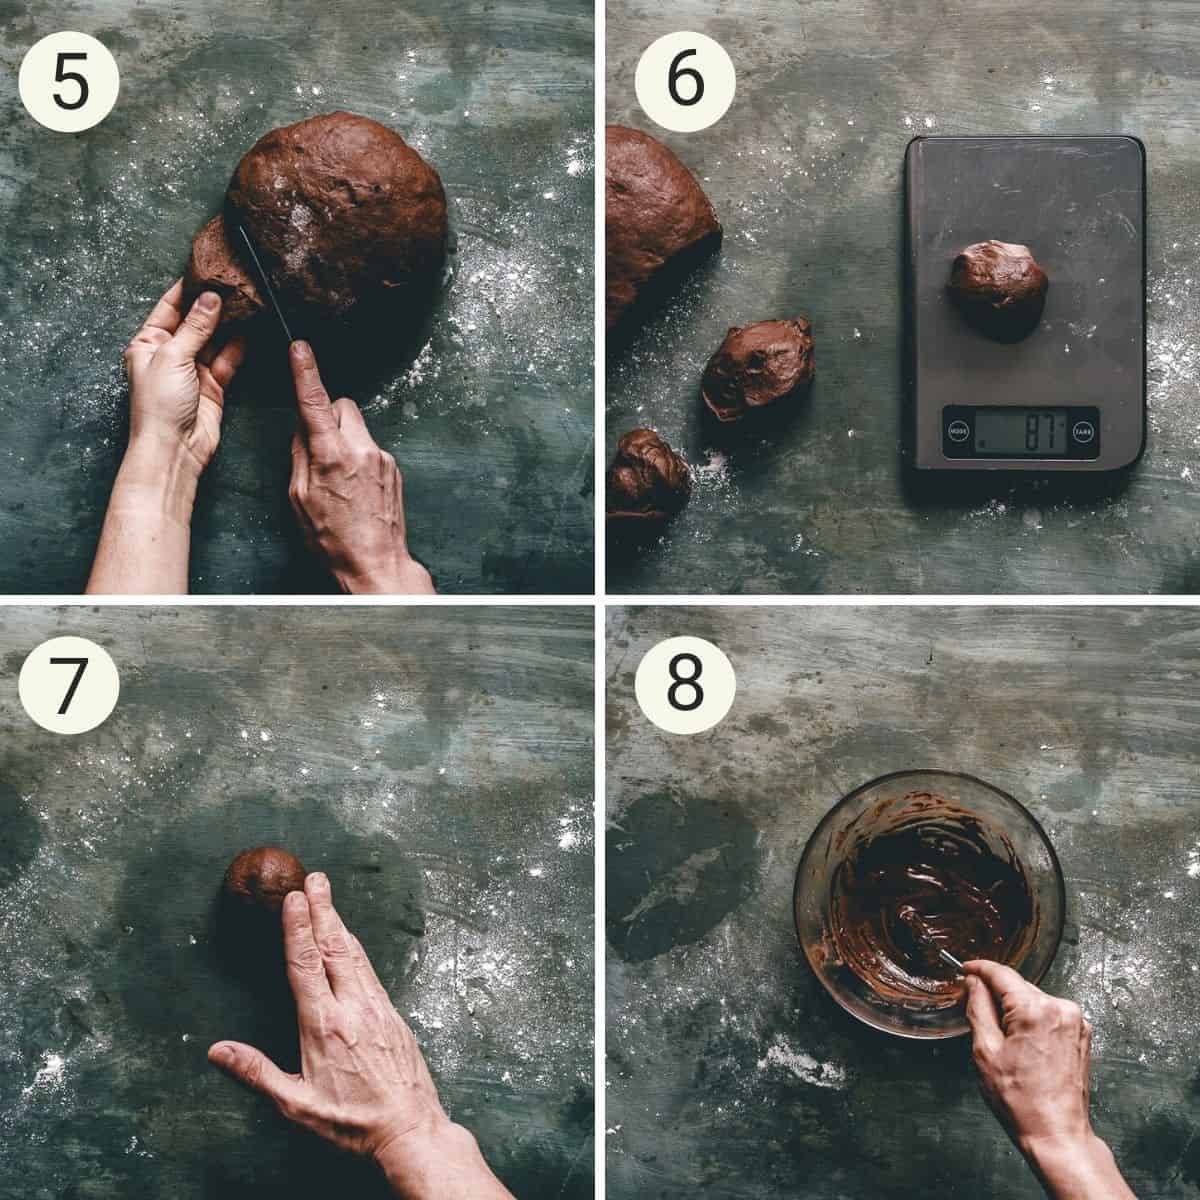 a 4 panel photograph showing how to prepare chocolate hot cross buns.